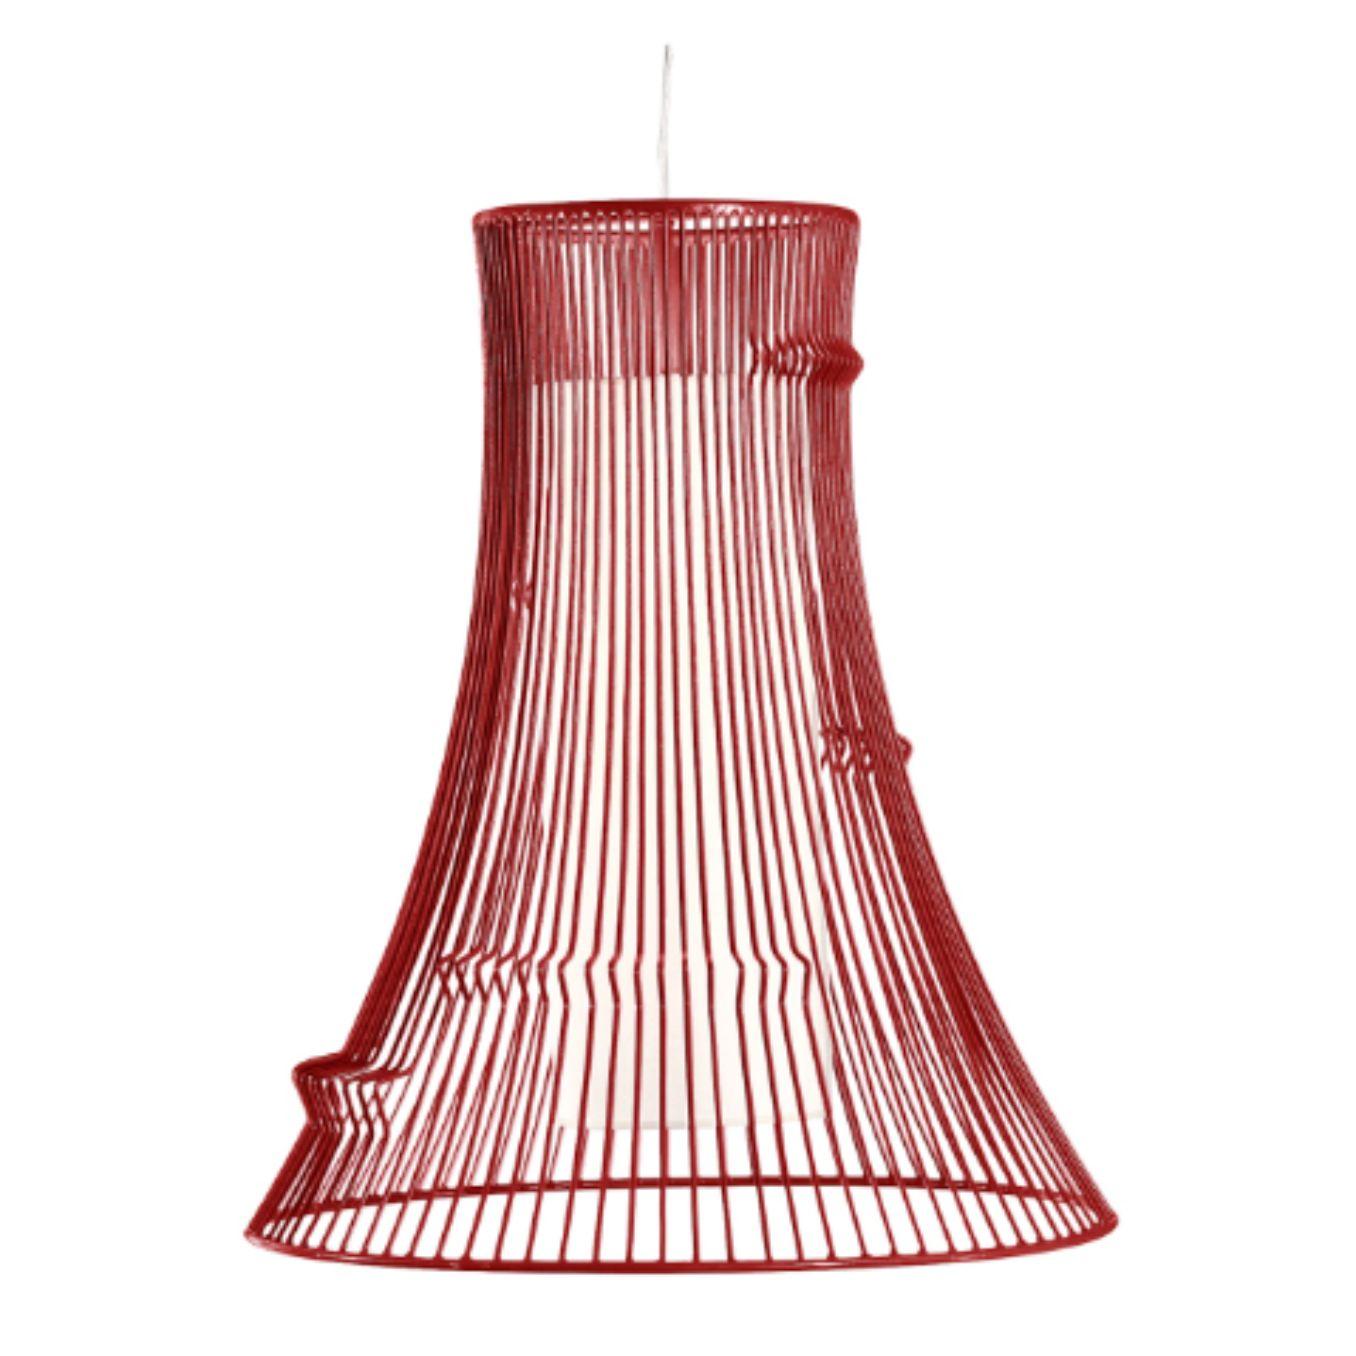 Lipstick extrude suspension lamp by Dooq.
Dimensions: W 60 x D 60 x H 70 cm.
Materials: lacquered metal
Abat-jour: cotton
Also available in different colors and materials. 

Information:
230V/50Hz
E27/1x20W LED
120V/60Hz
E26/1x15W LED
bulb not